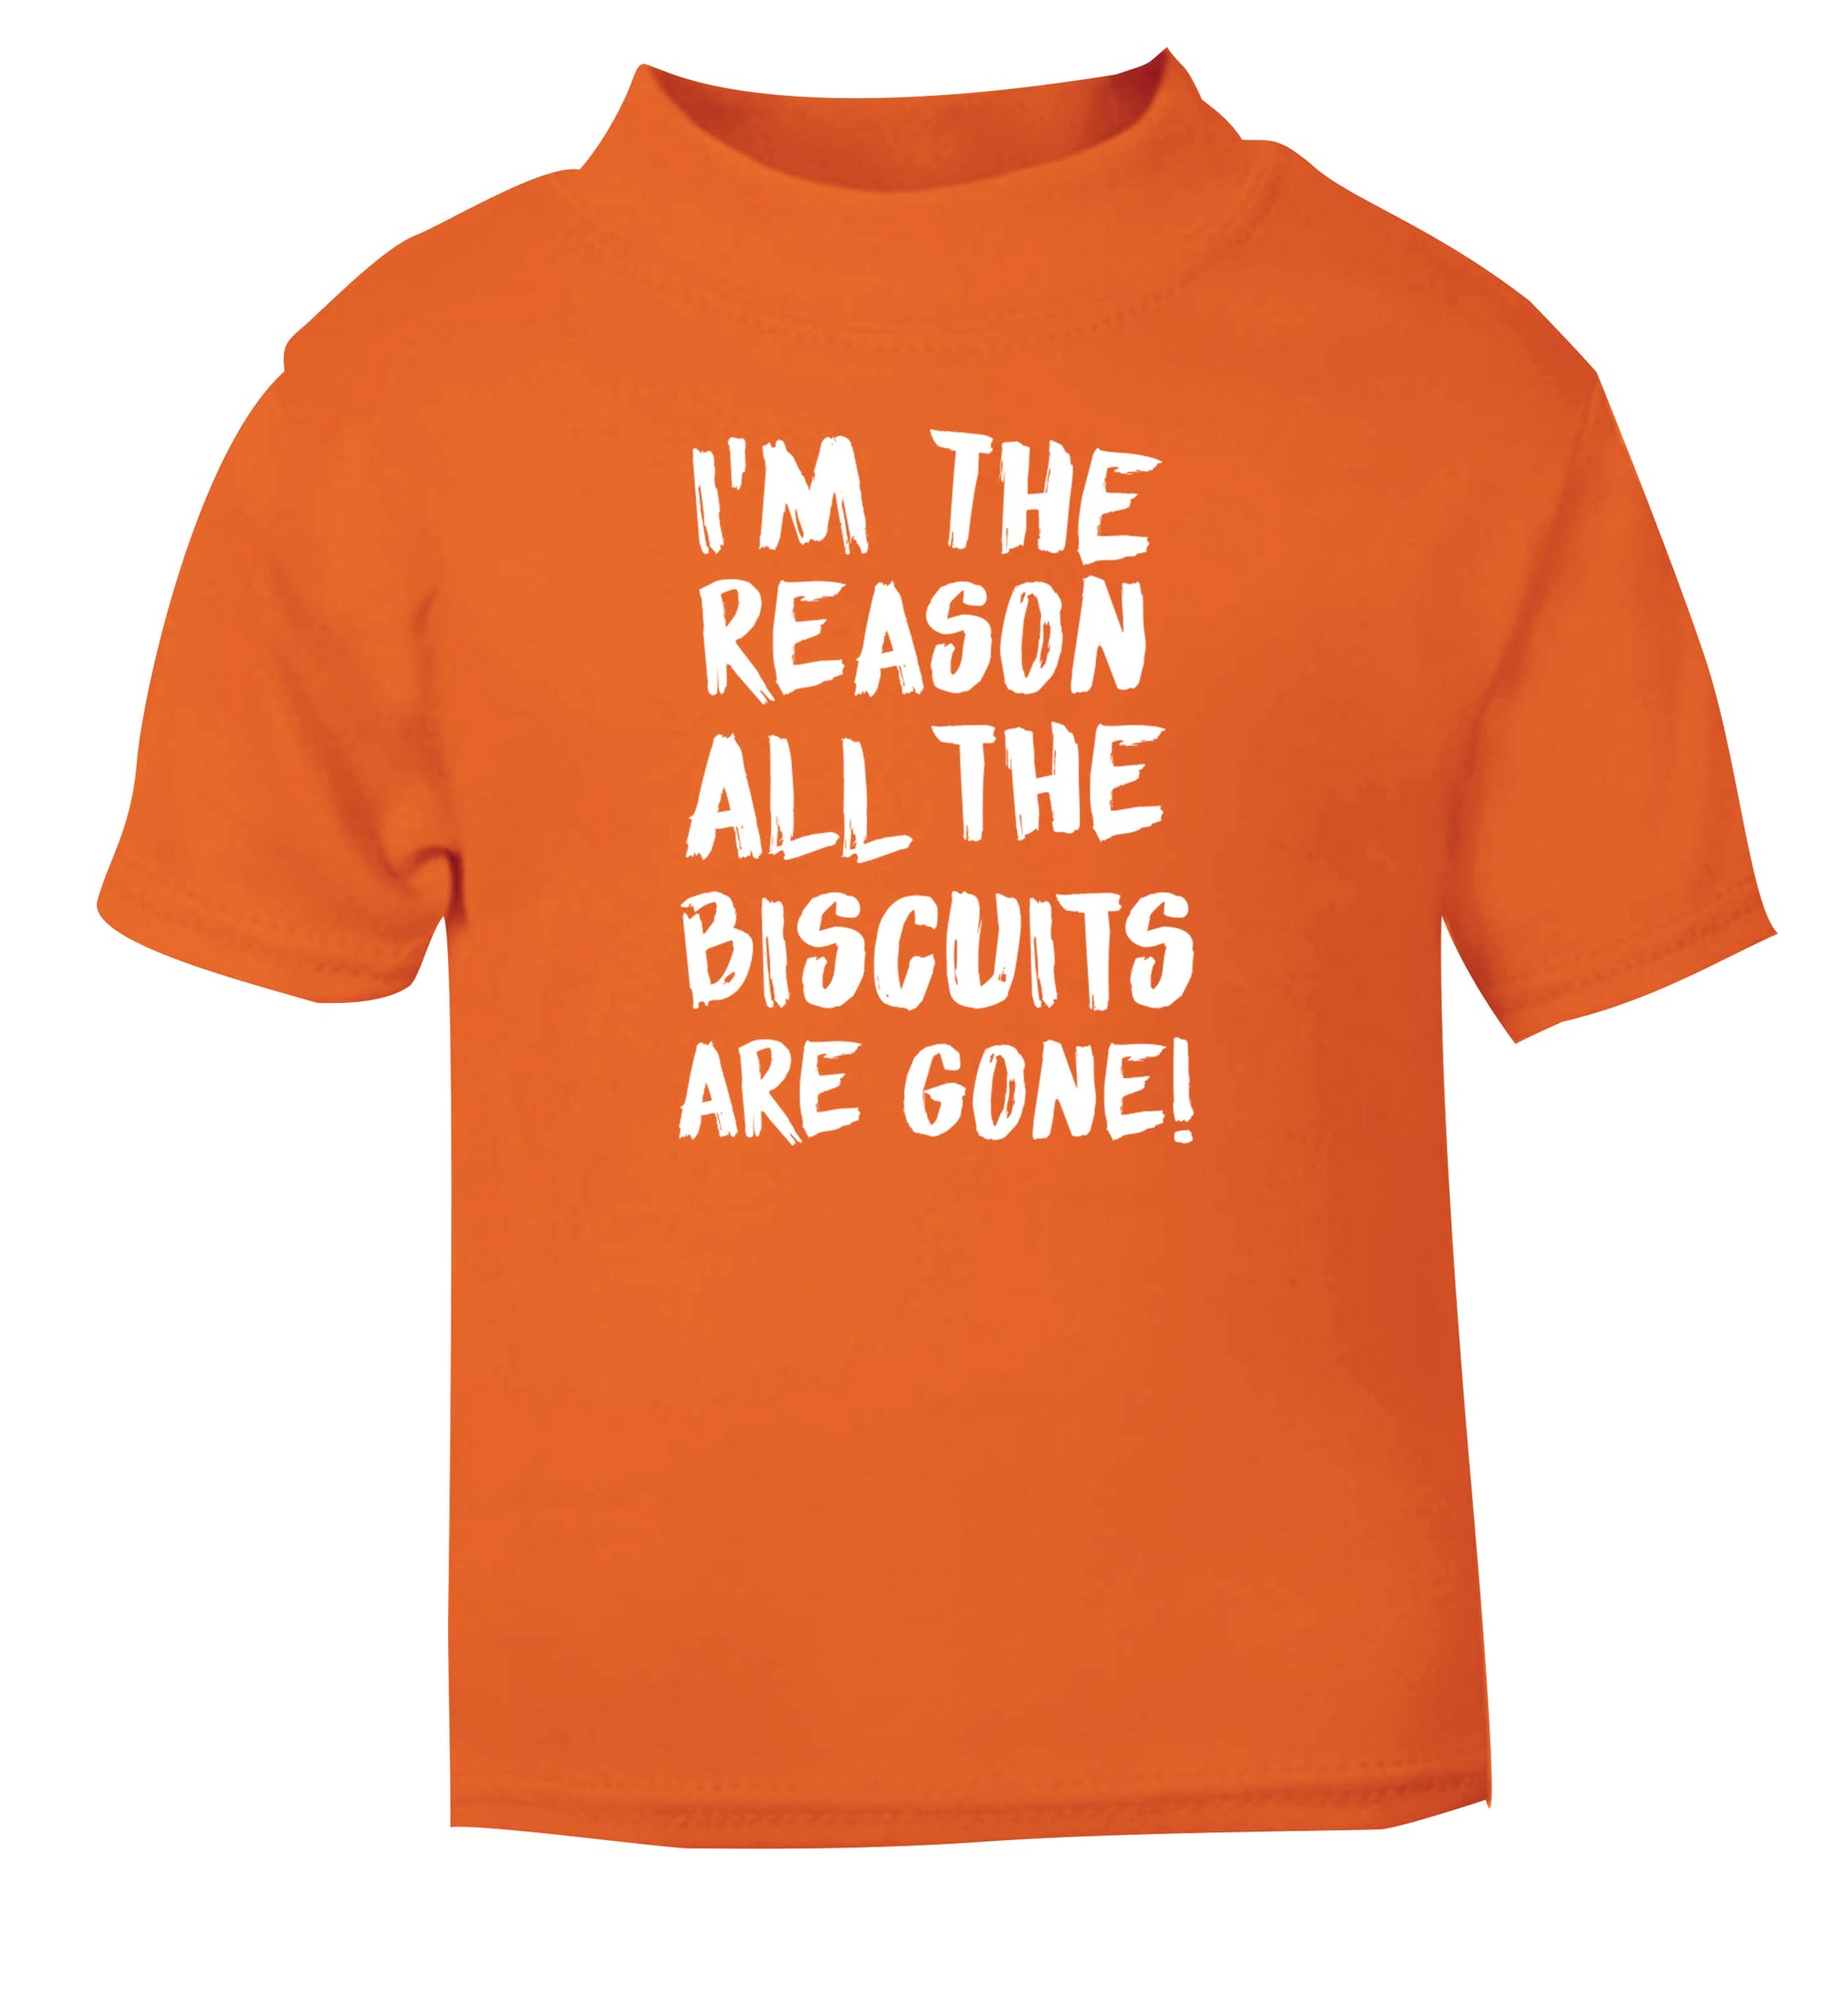 I'm the reason why all the biscuits are gone orange Baby Toddler Tshirt 2 Years